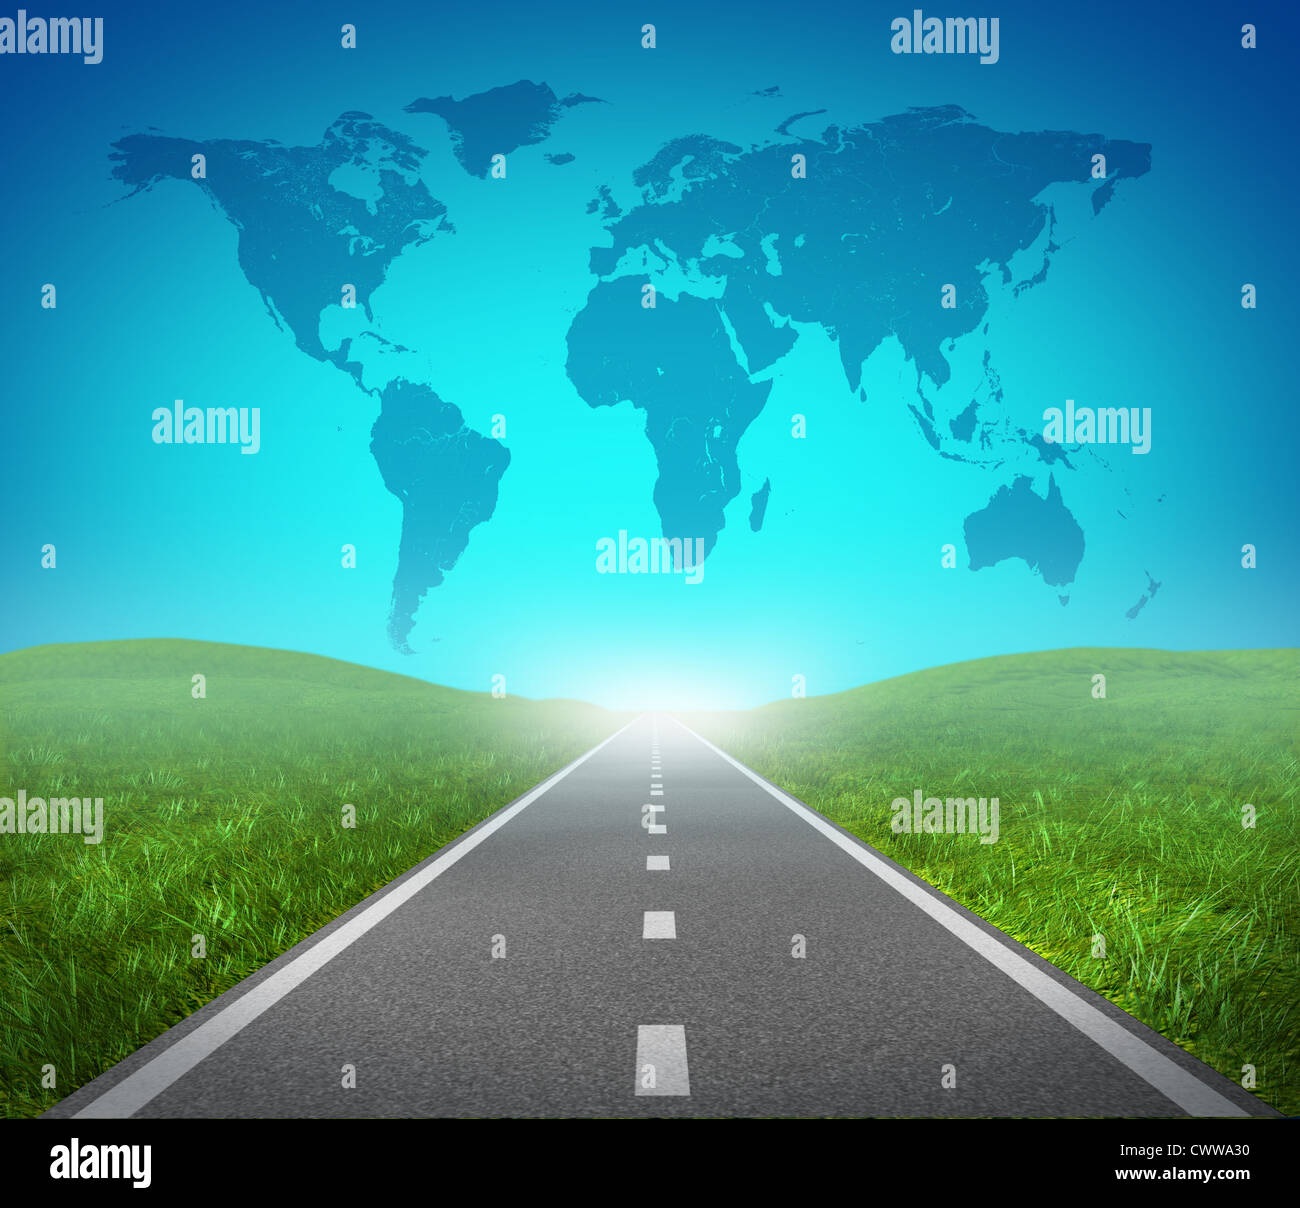 International road highway and global map with green grass and asphalt street representing the concept of journey to a focused international destination resulting in success in trade and political direction. Stock Photo